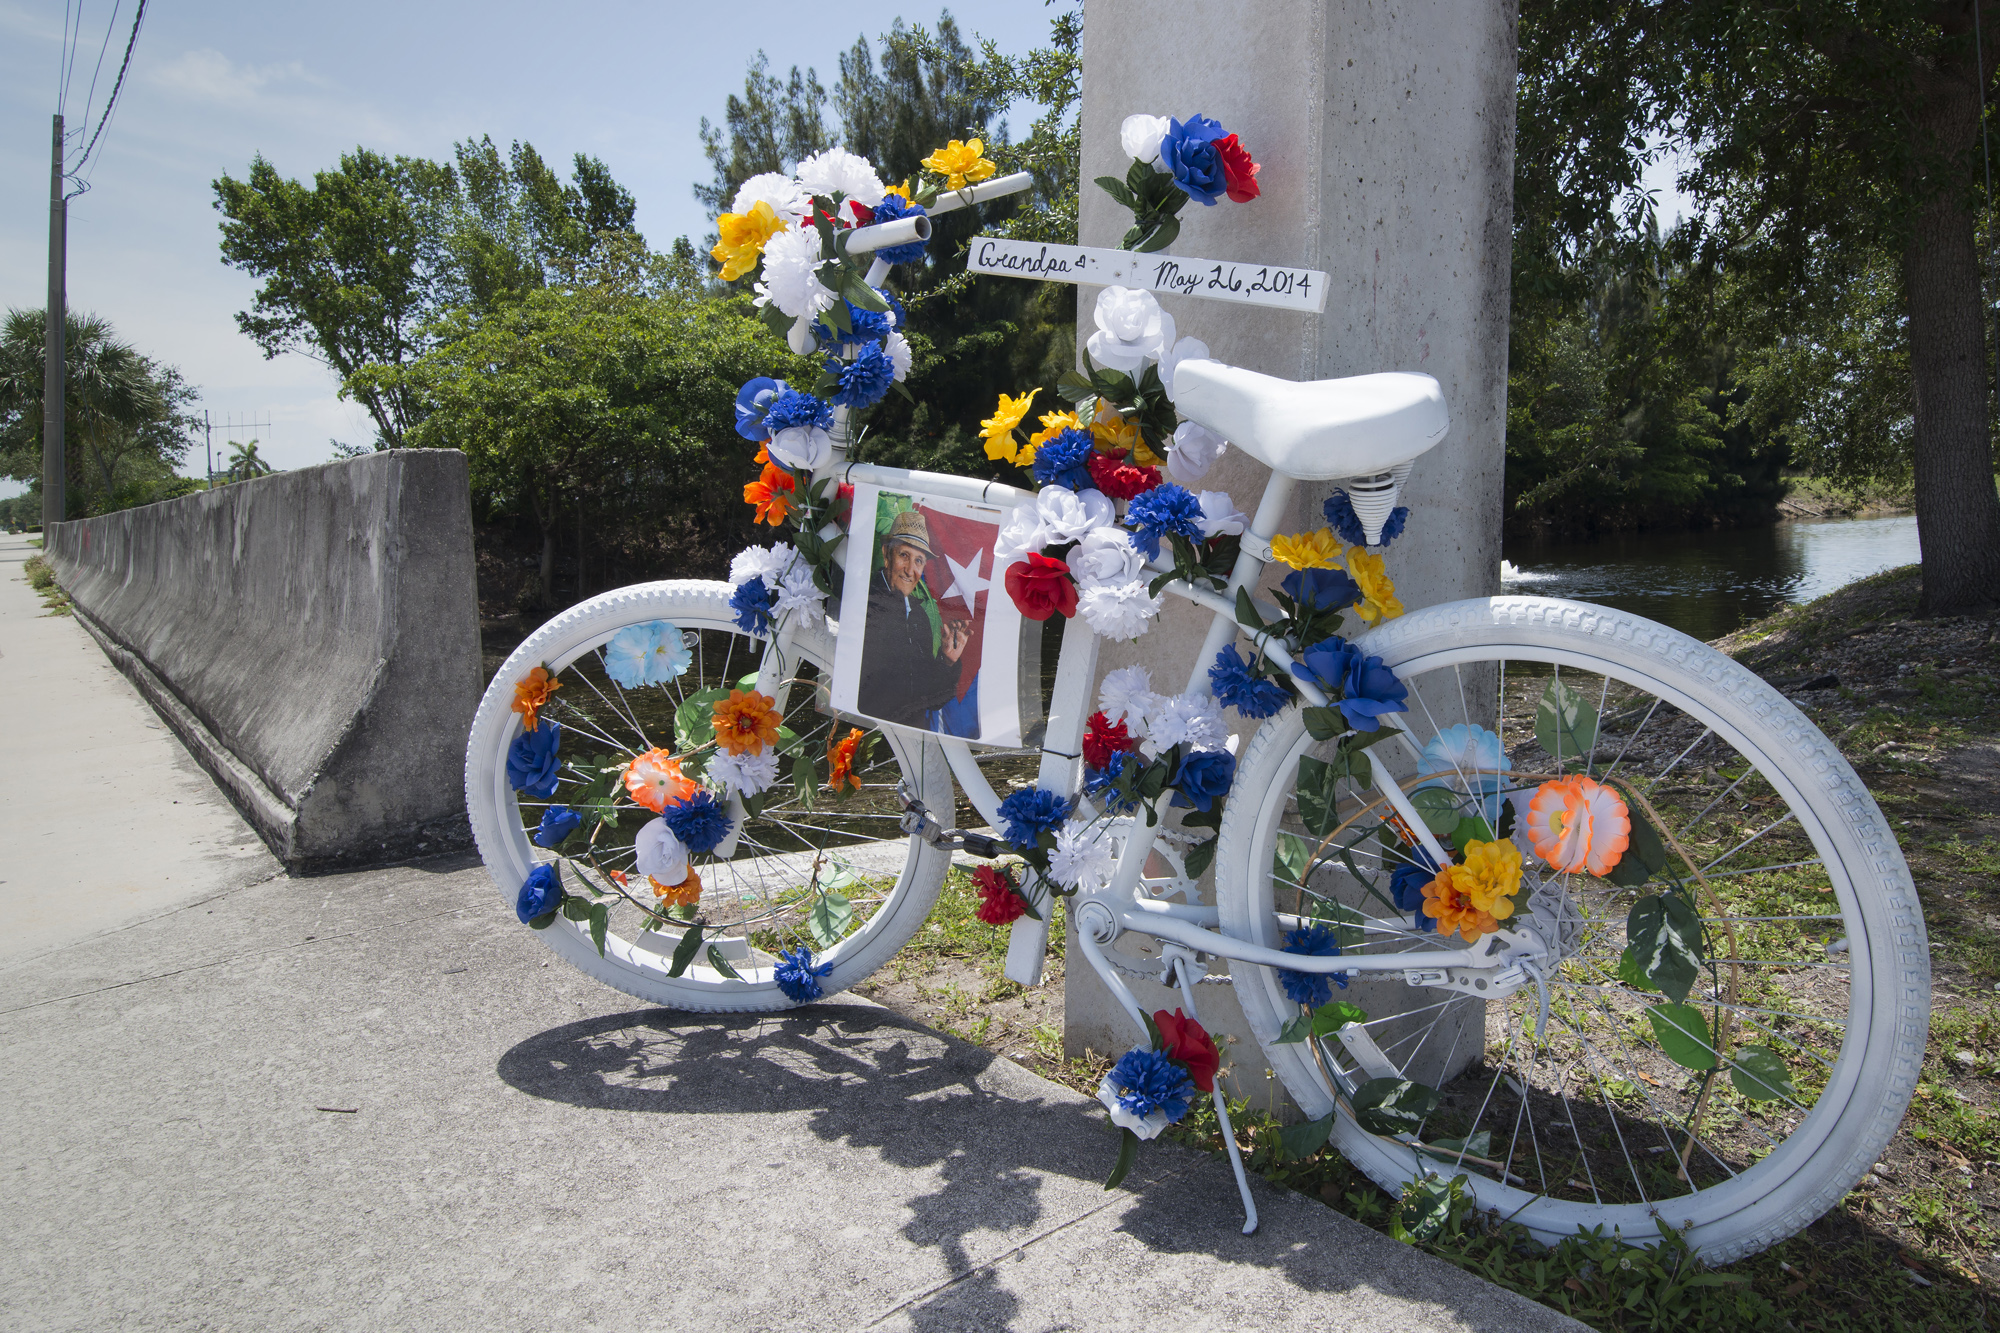 A memorial was set up days after the accident. - Photo by Adam Baron